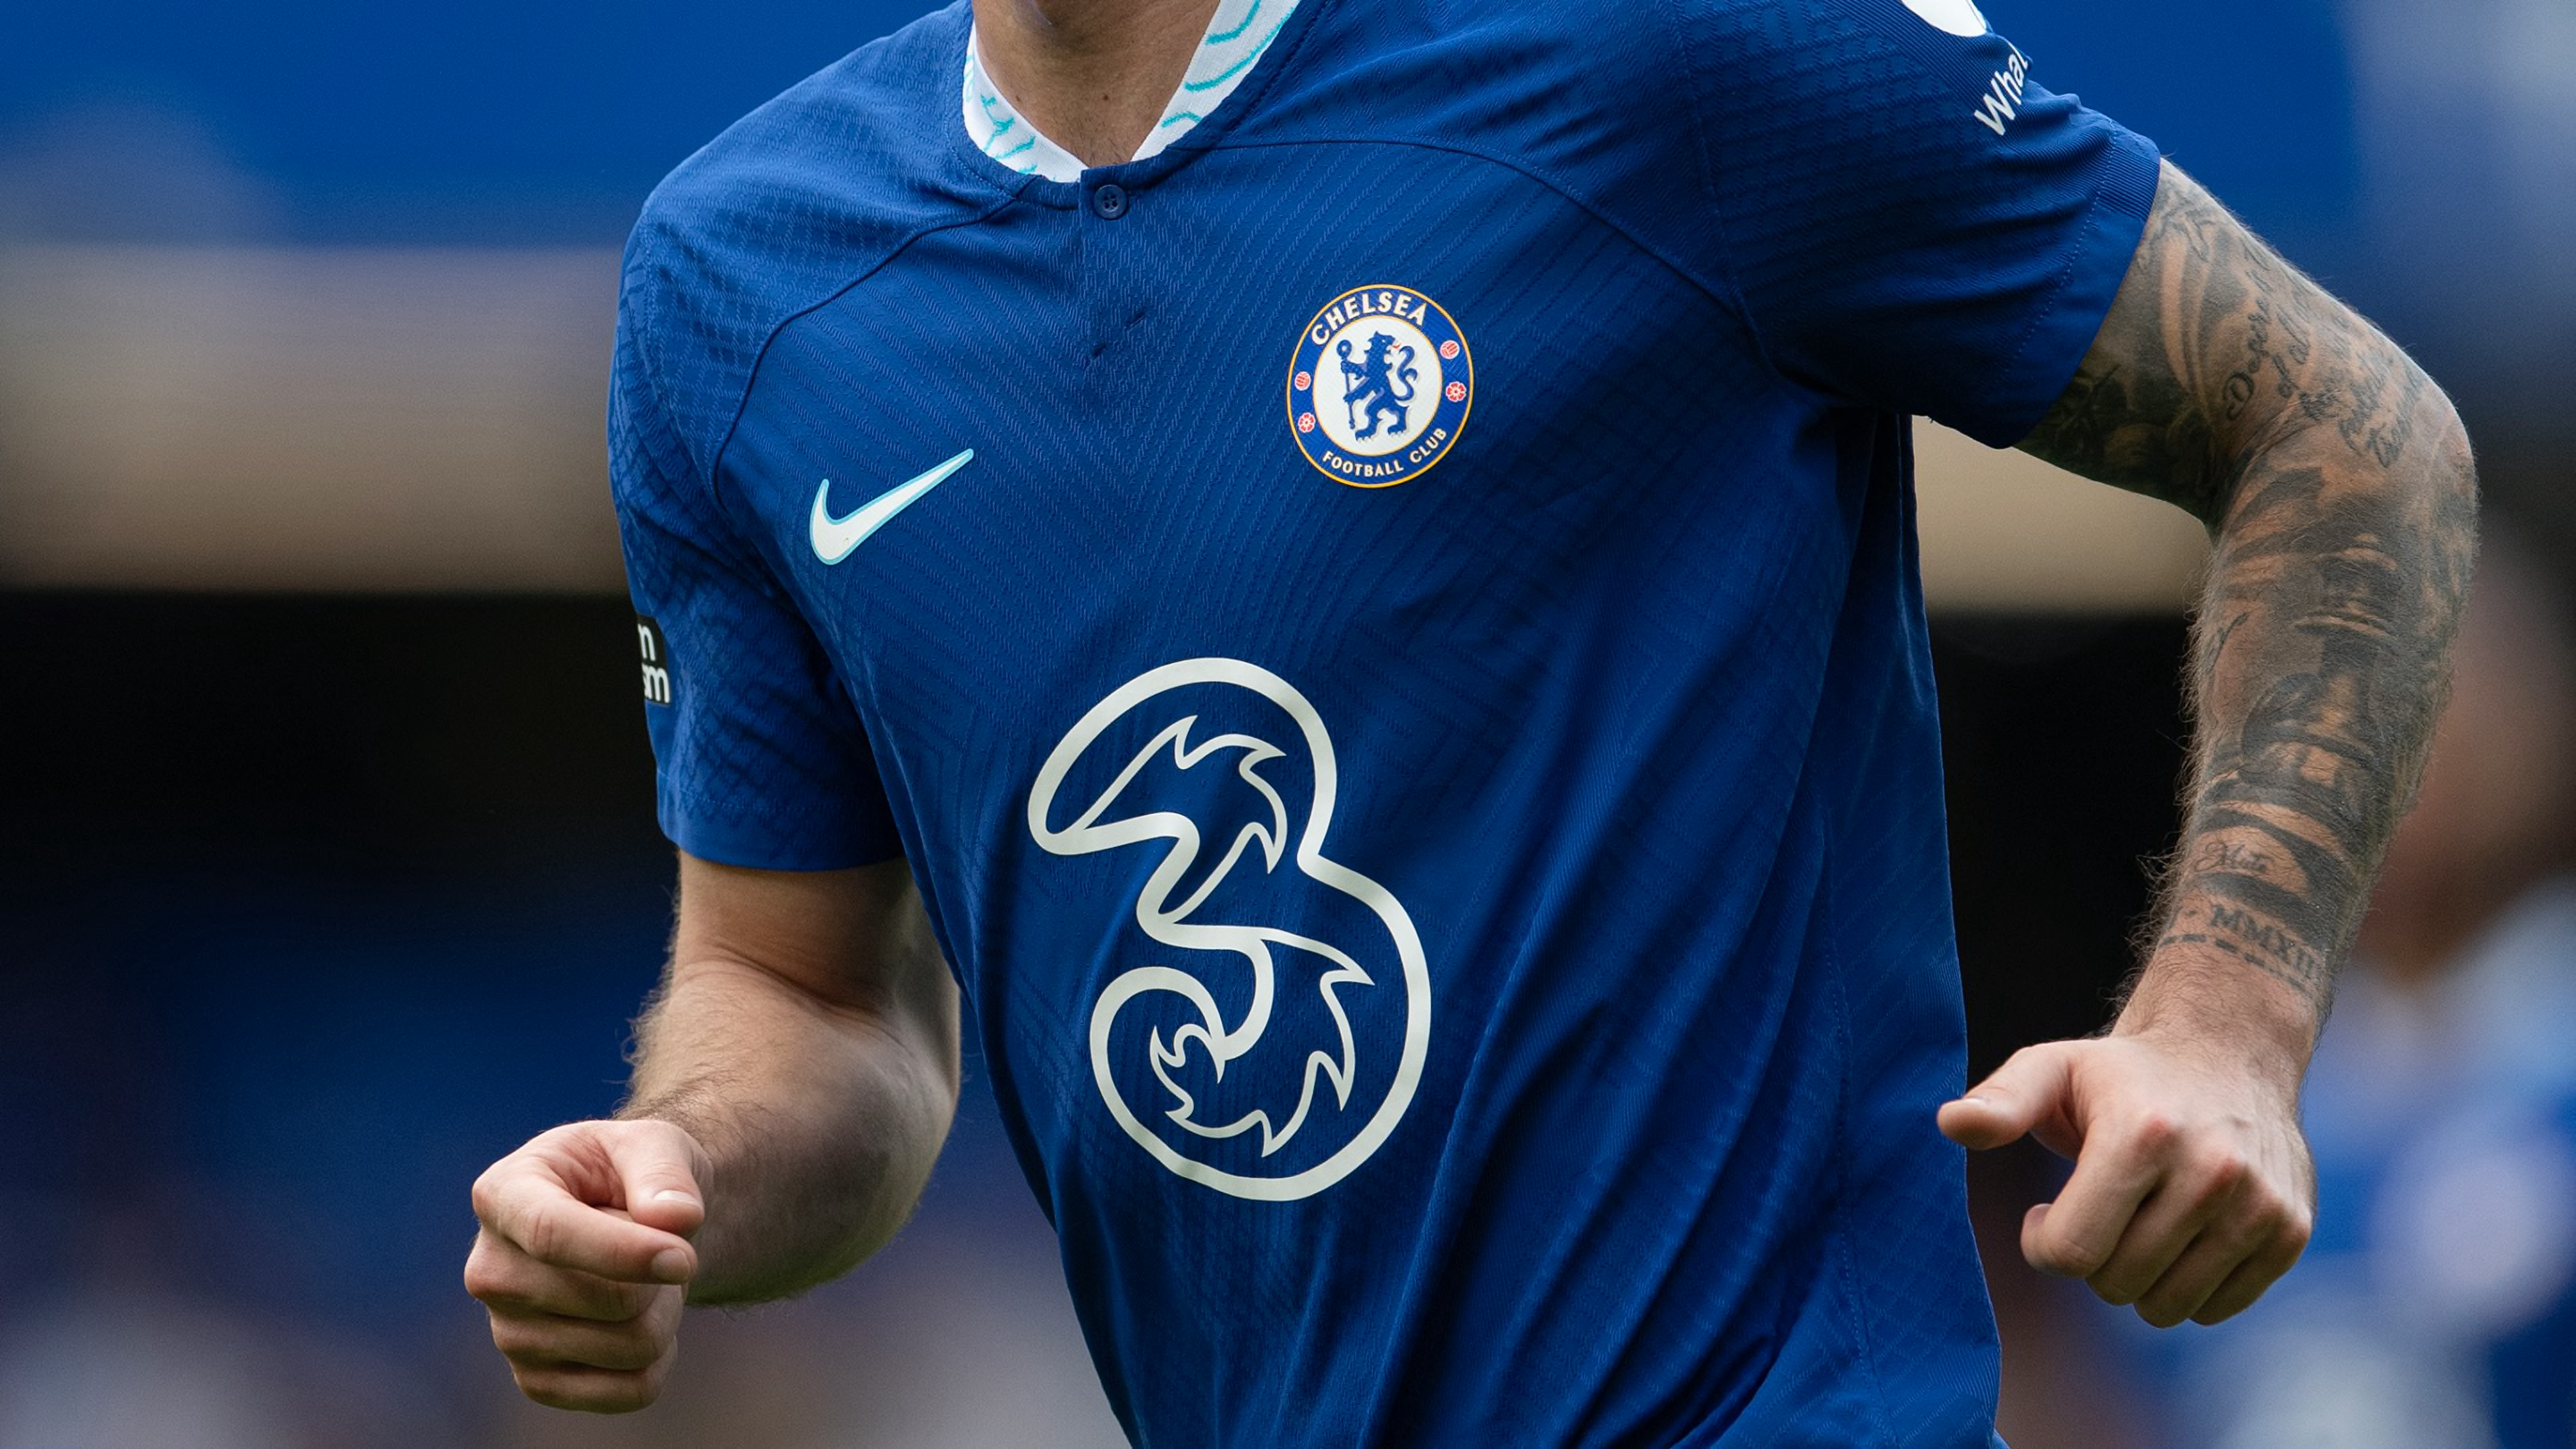 Chelsea back out of Stake.com deal & remain without shirt sponsor